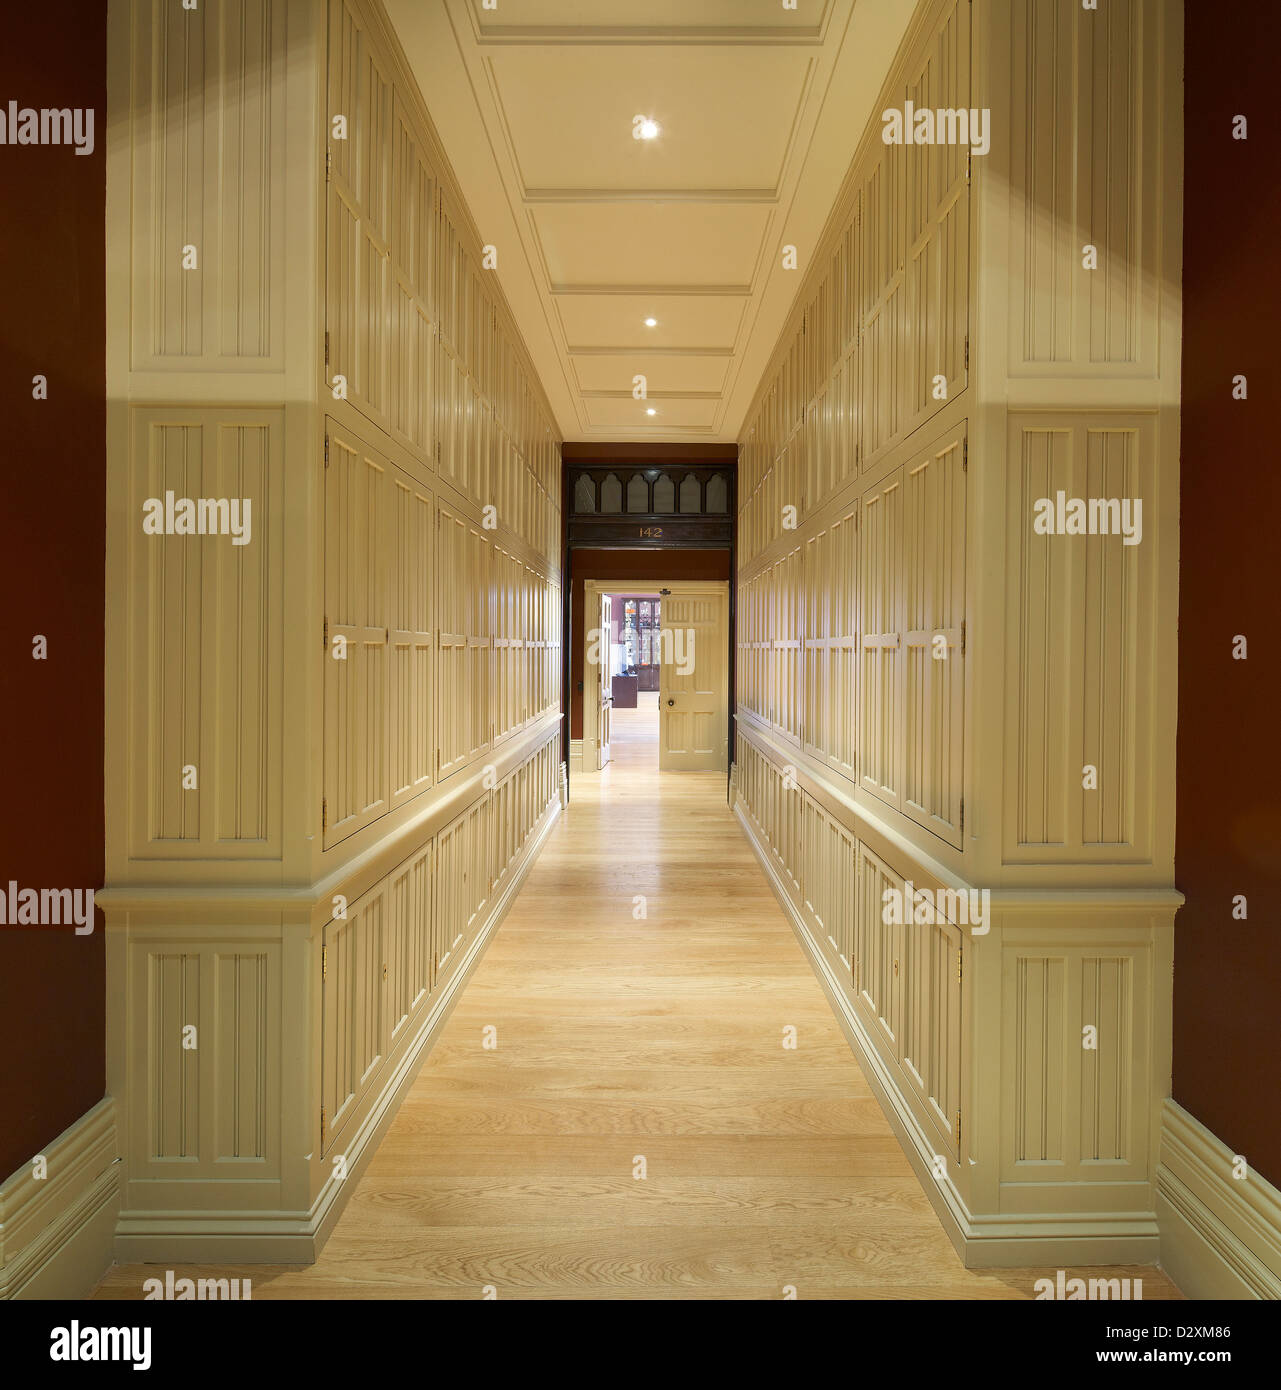 St Pancras Hotel, London, United Kingdom. Architect: Sir Giles Gilbert Scott with Richard Griffiths Arc, 2011. Corridor with bes Stock Photo